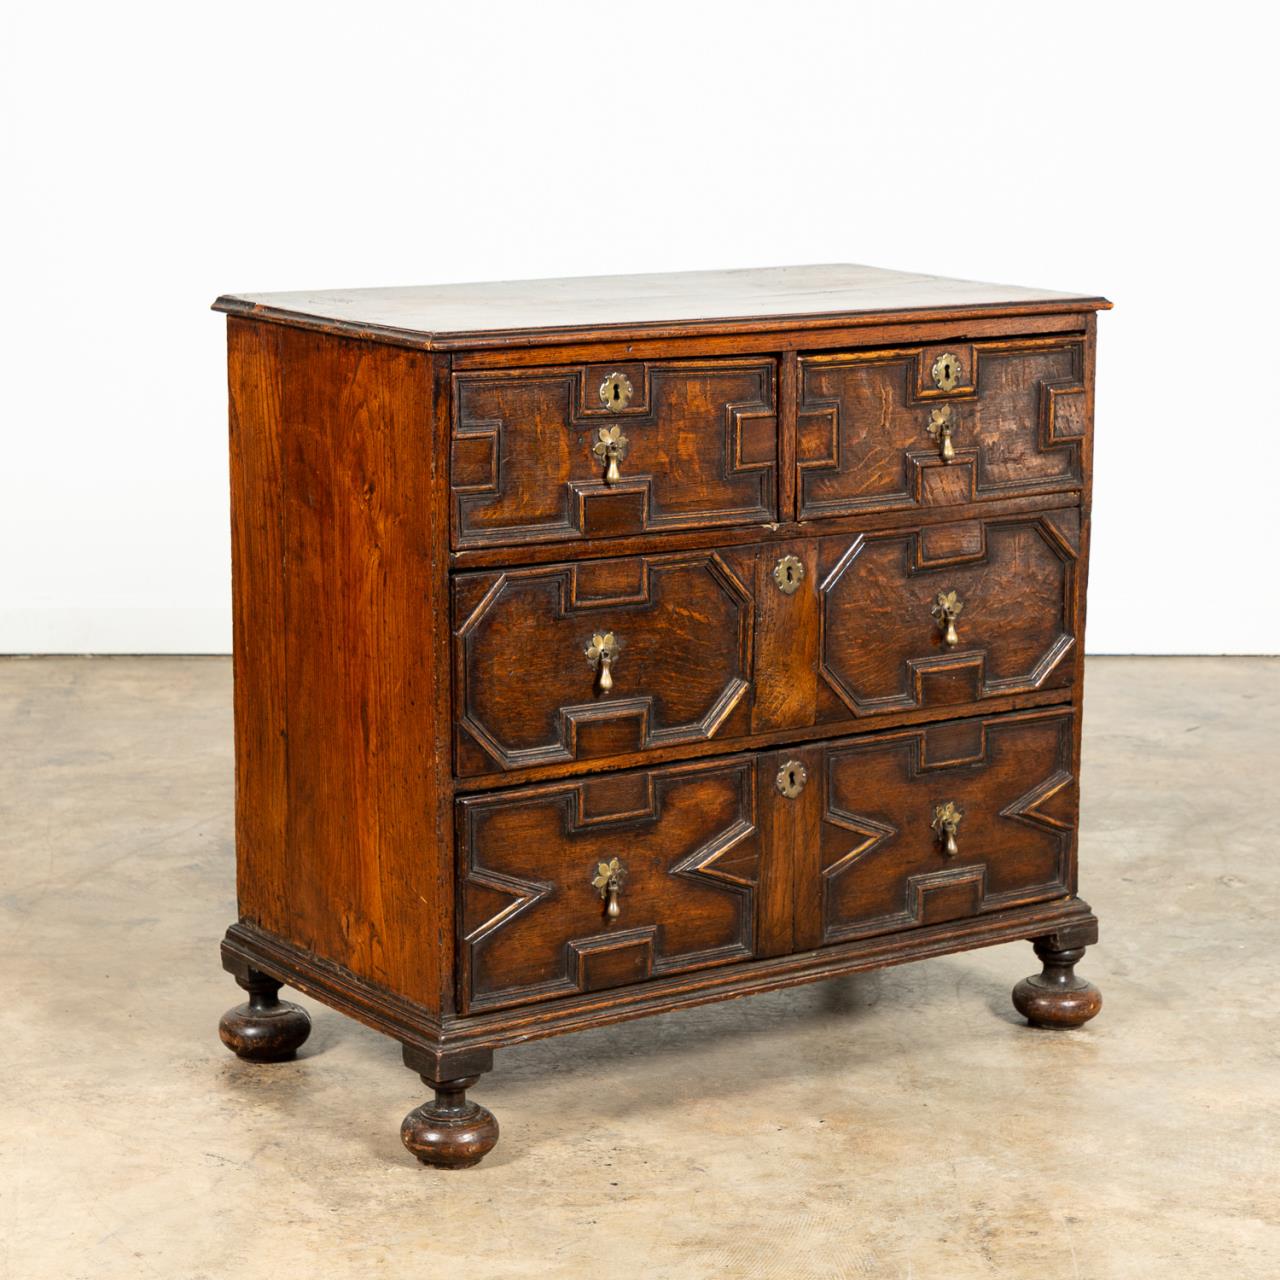 18TH C. WILLIAM AND MARY FOUR-DRAWER